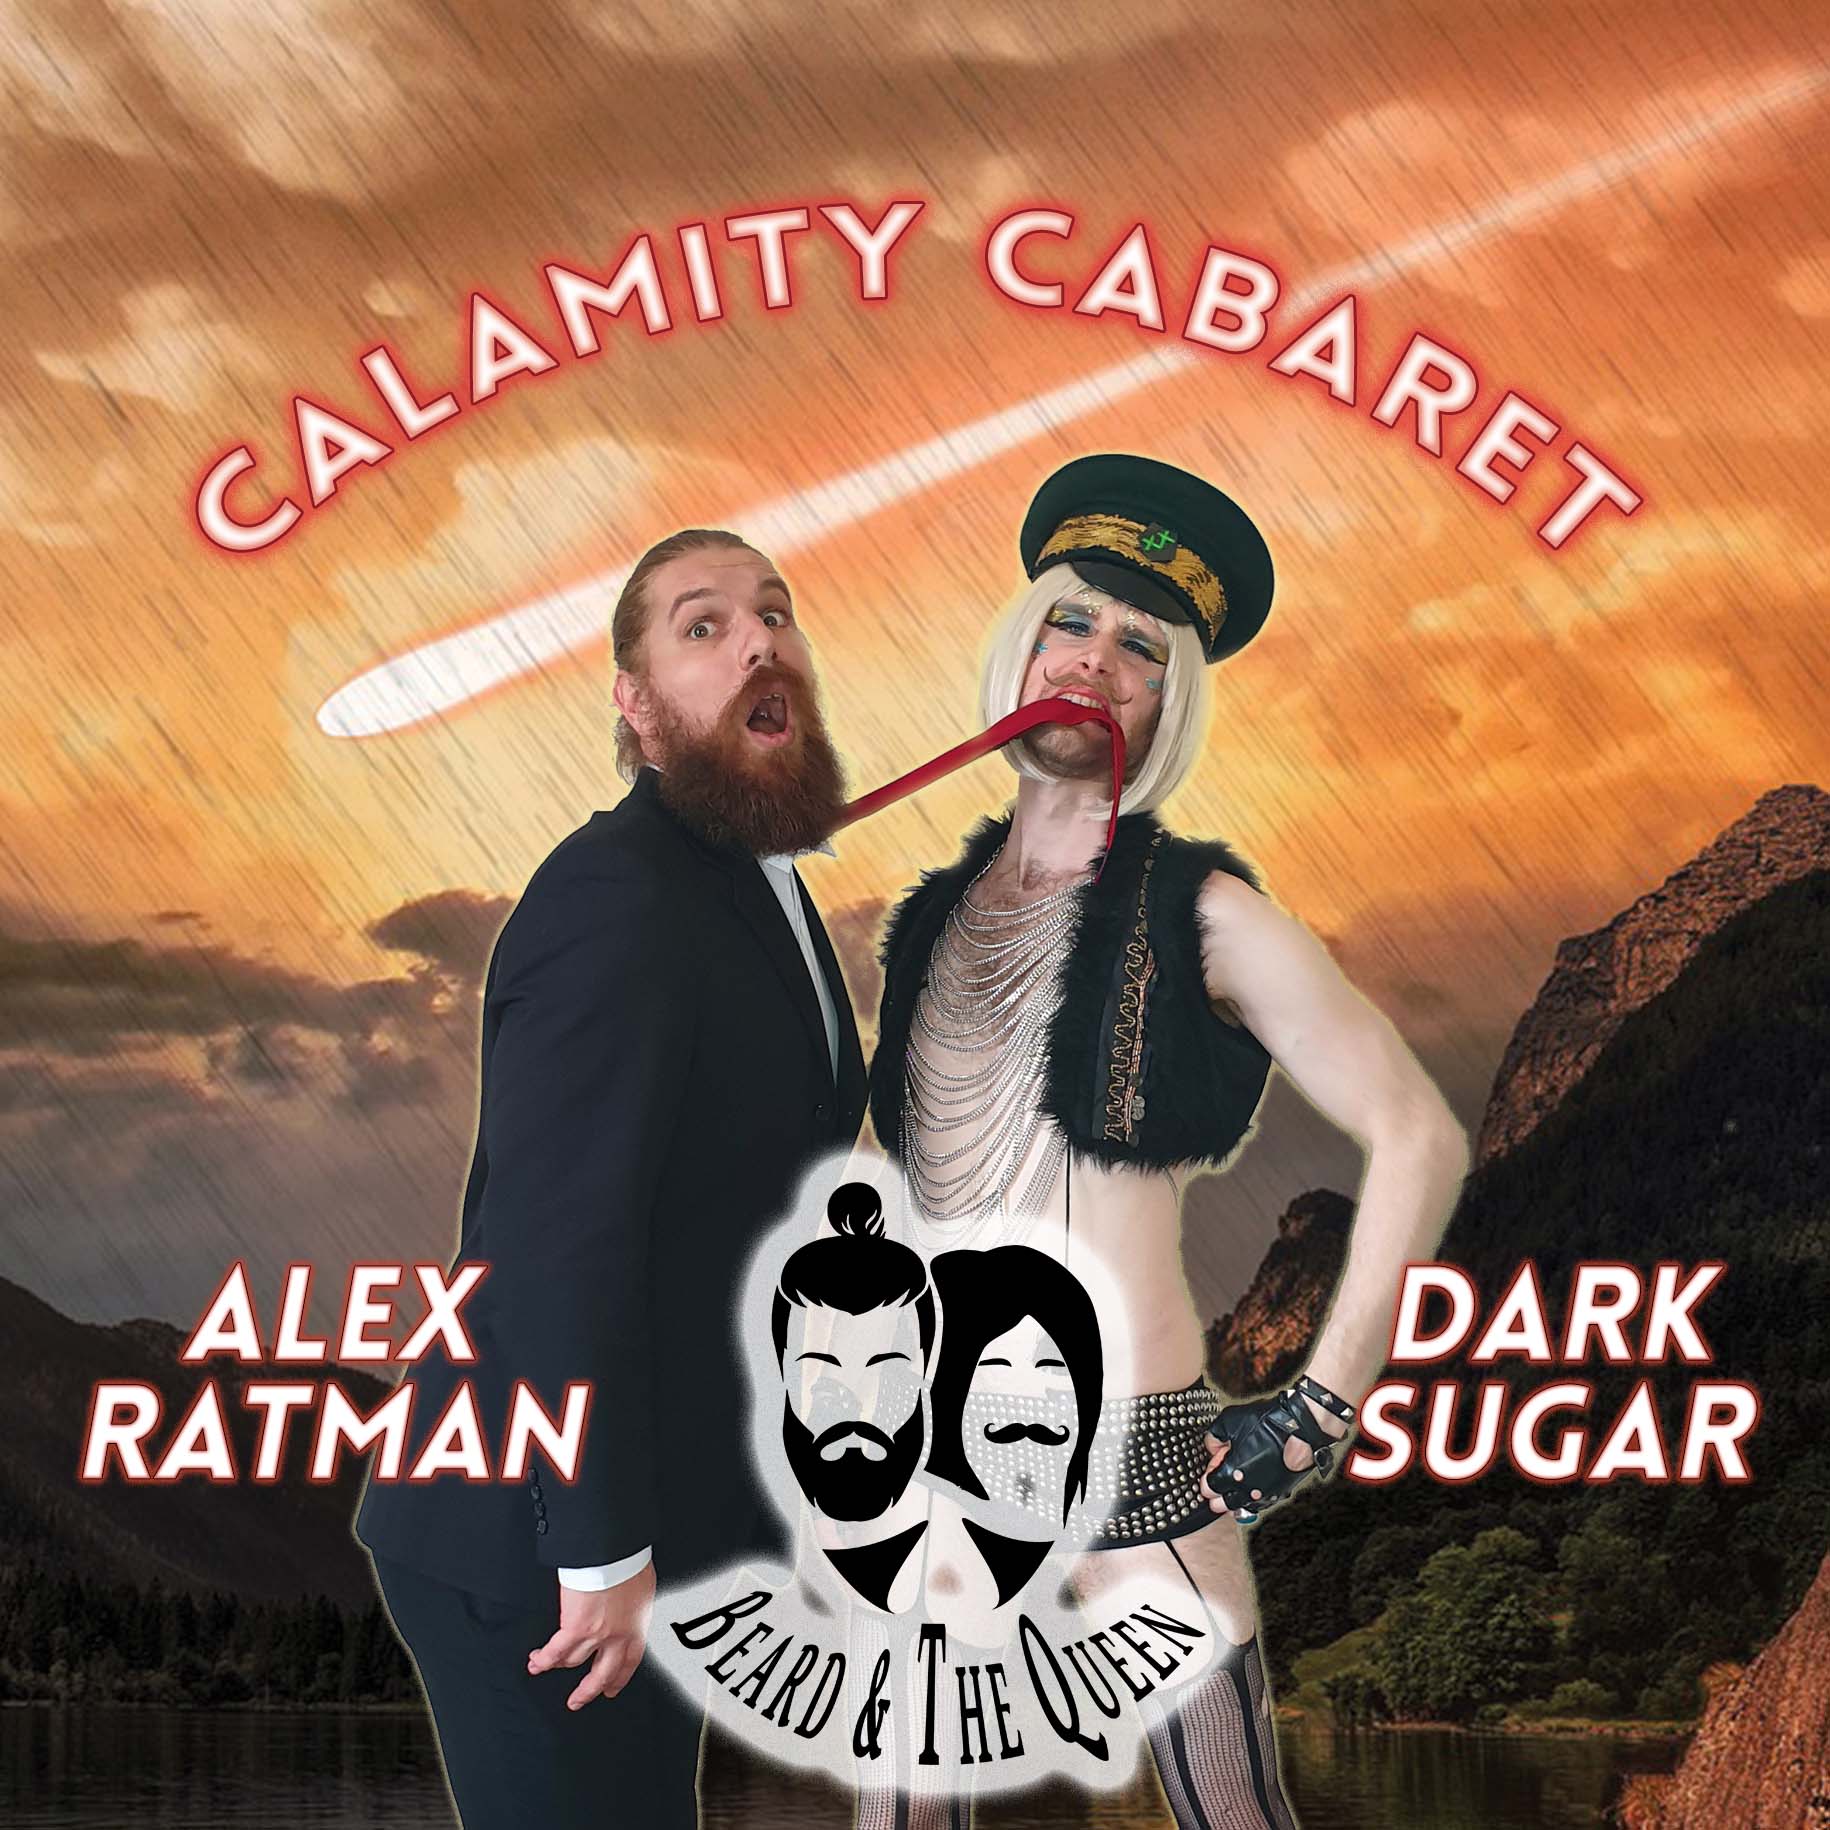 alex ratman and dark sugar the drag queen are the hosts of calamity cabaret